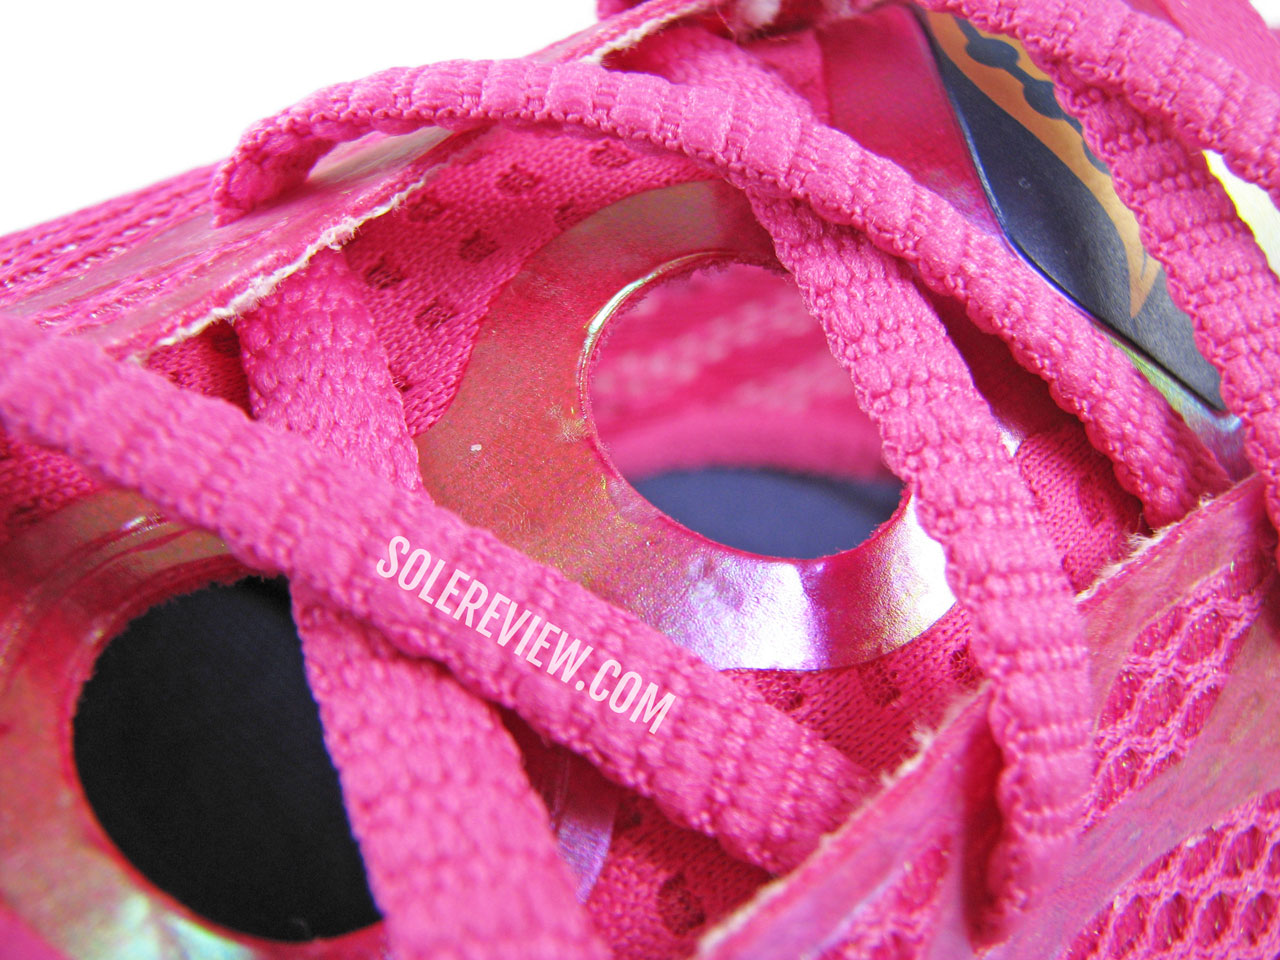 The vented tongue of the Saucony Endorphin Pro 3.